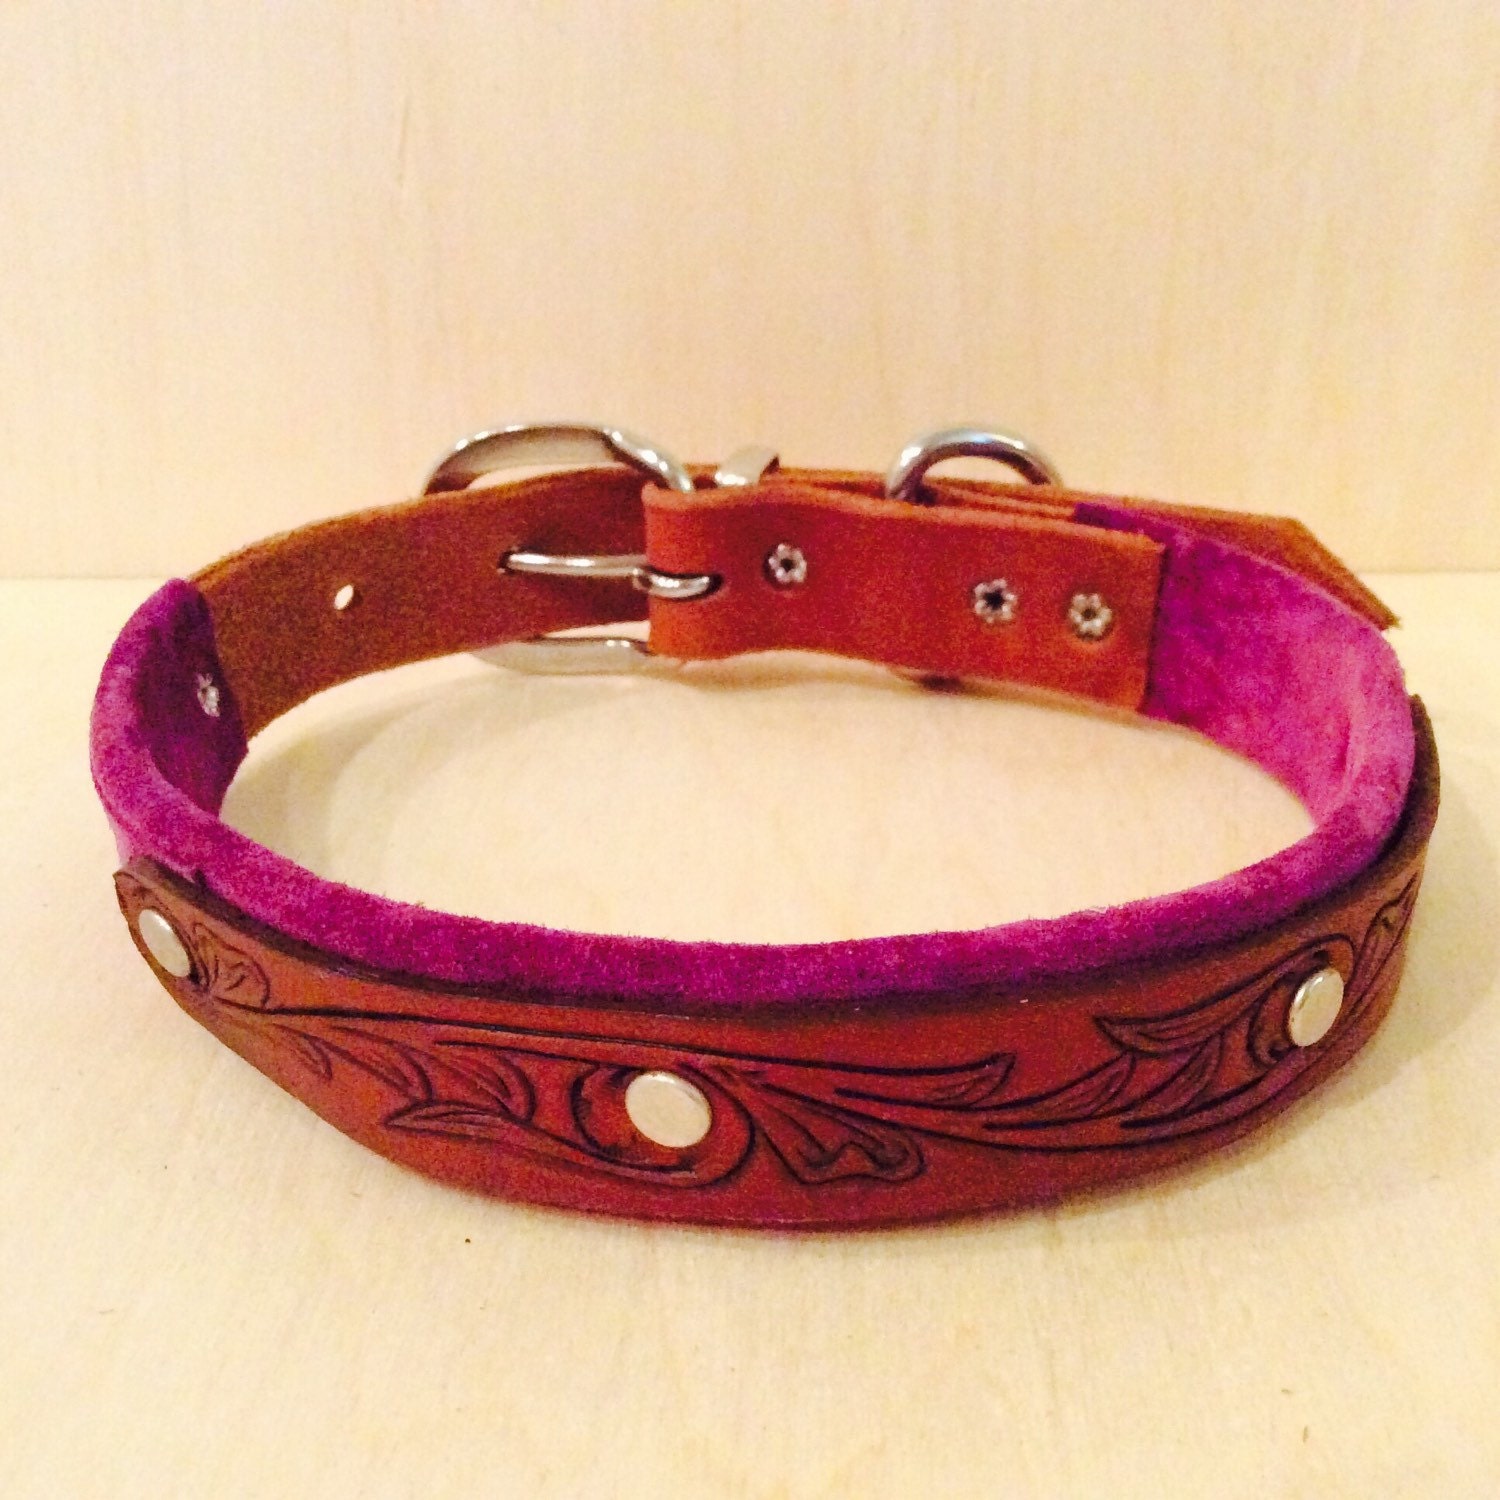 handmade-leather-dog-collar-with-hand-tooled-vine-pattern-and